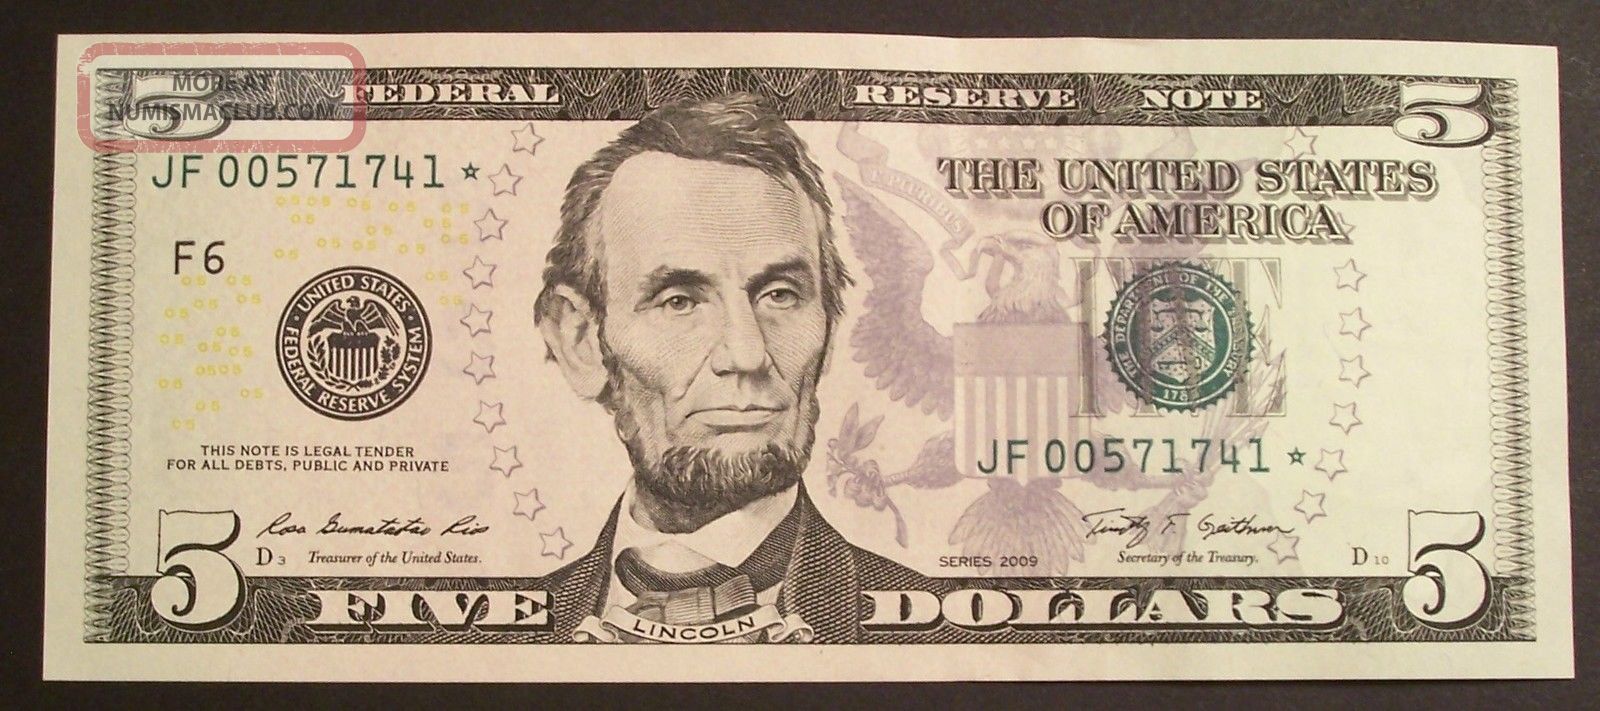 Rare 2009 $5 Star Note Jf 00571741 About Uncirculated